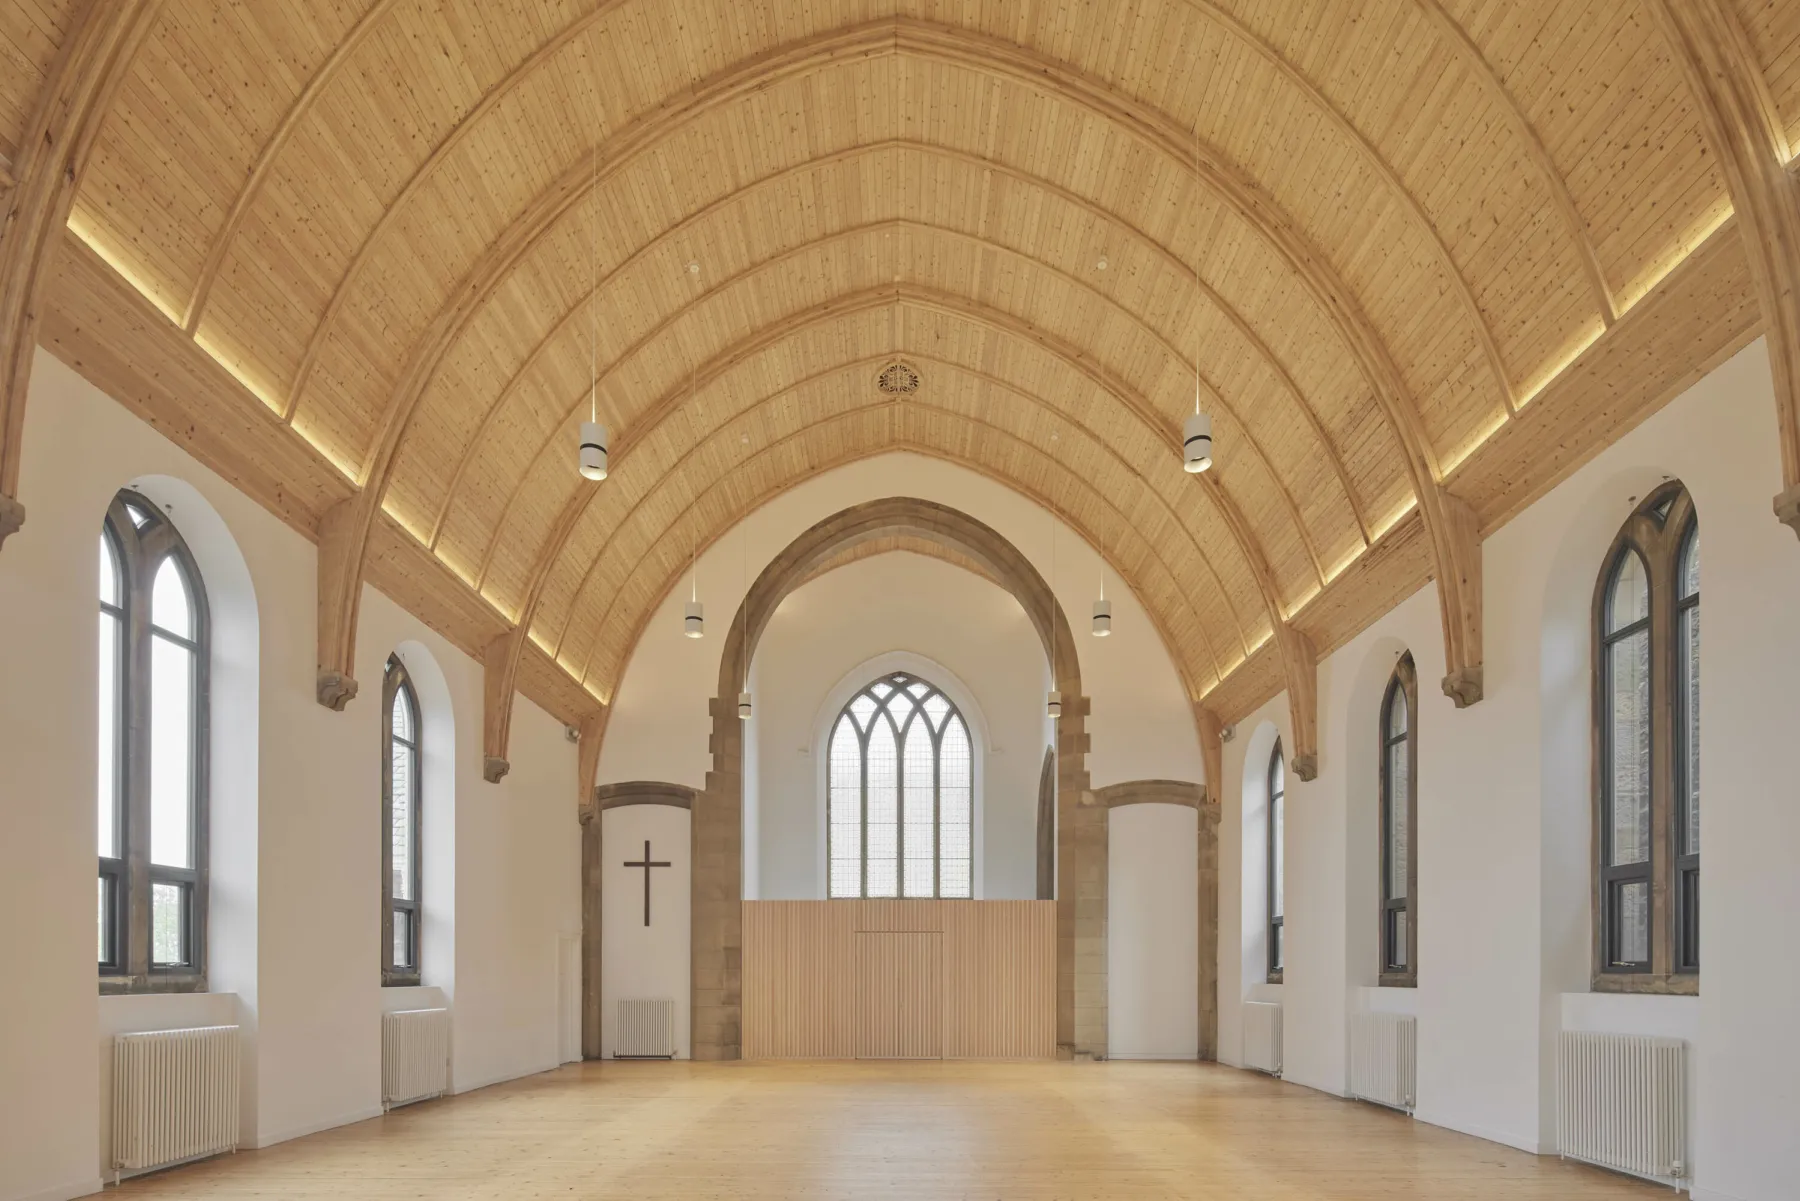 The nave at the restored and converted former church at the Greyfriars Charteris Centre, Edinburgh. The timbered ceiling is lighter, the floor has been polished and new apse screen erected. It is a bright space with better light from new unleaded, windows.